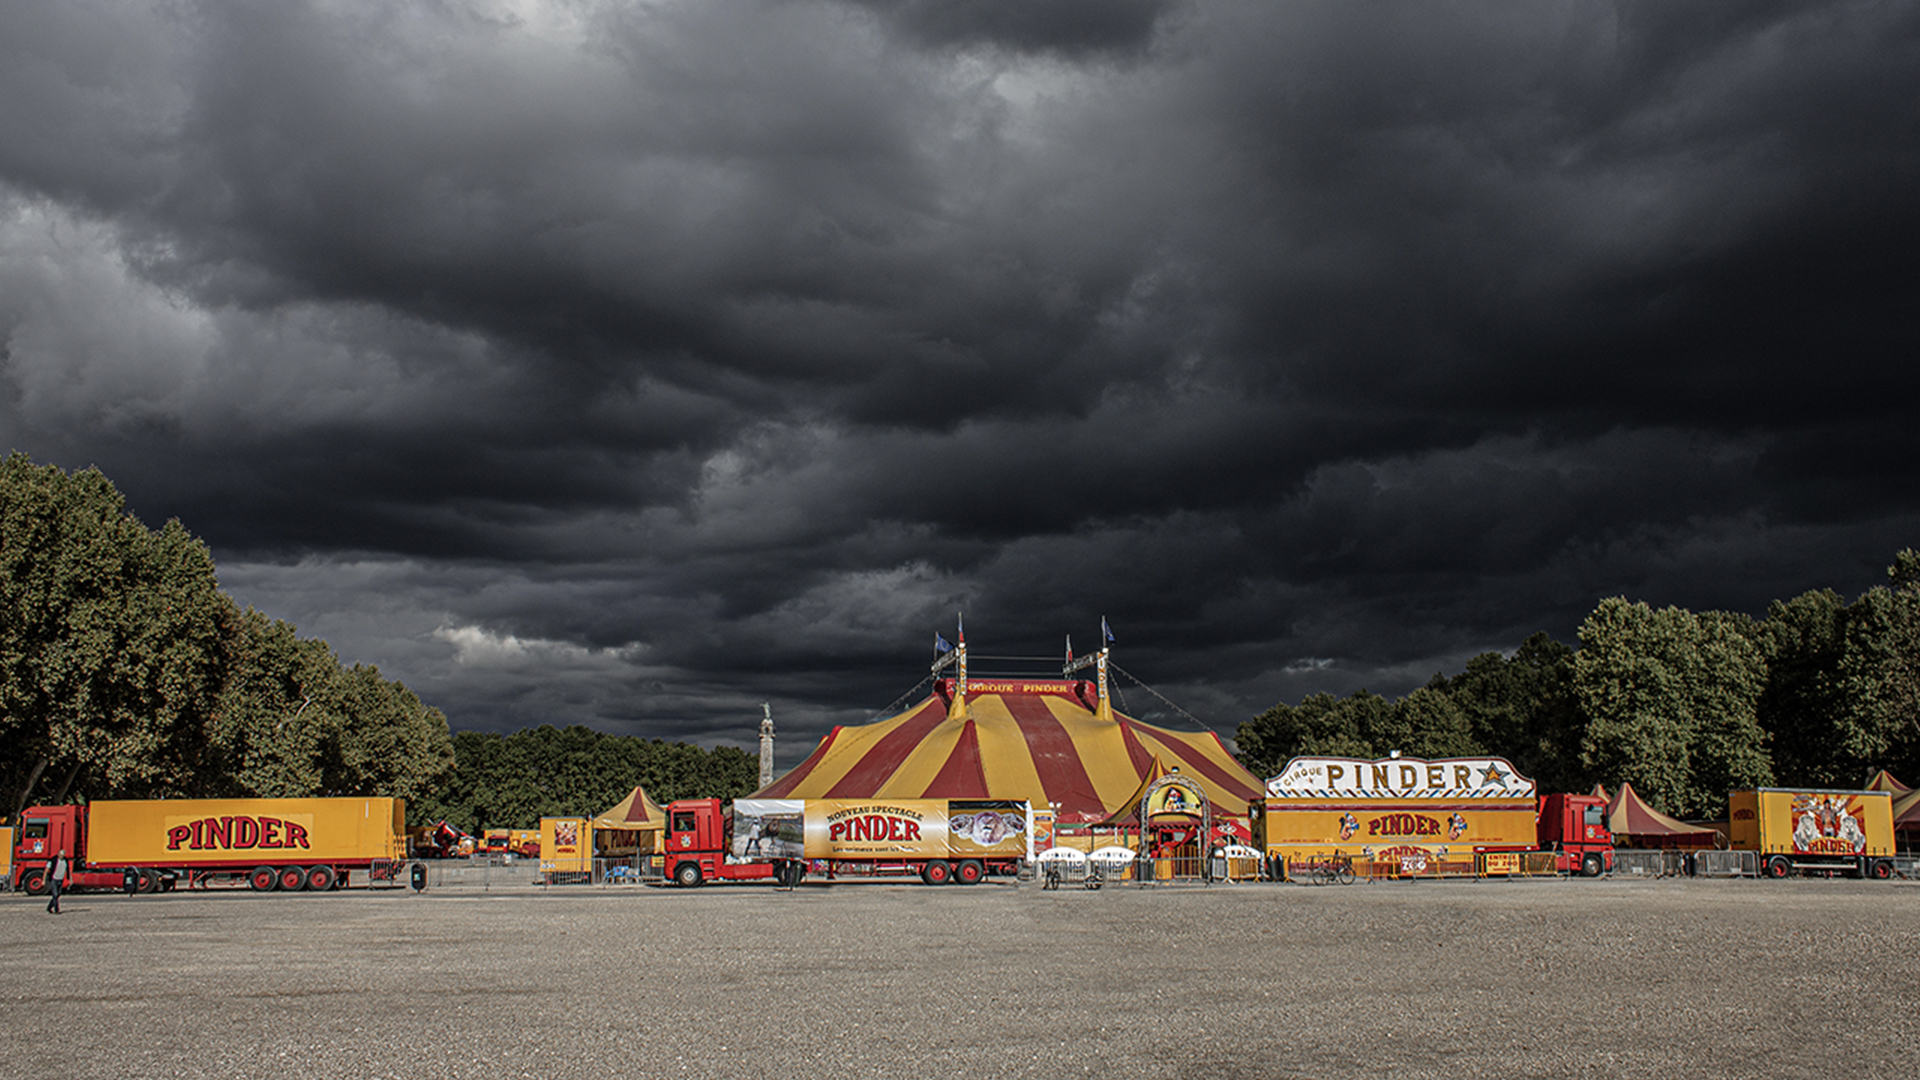 Stormy sky over a circus